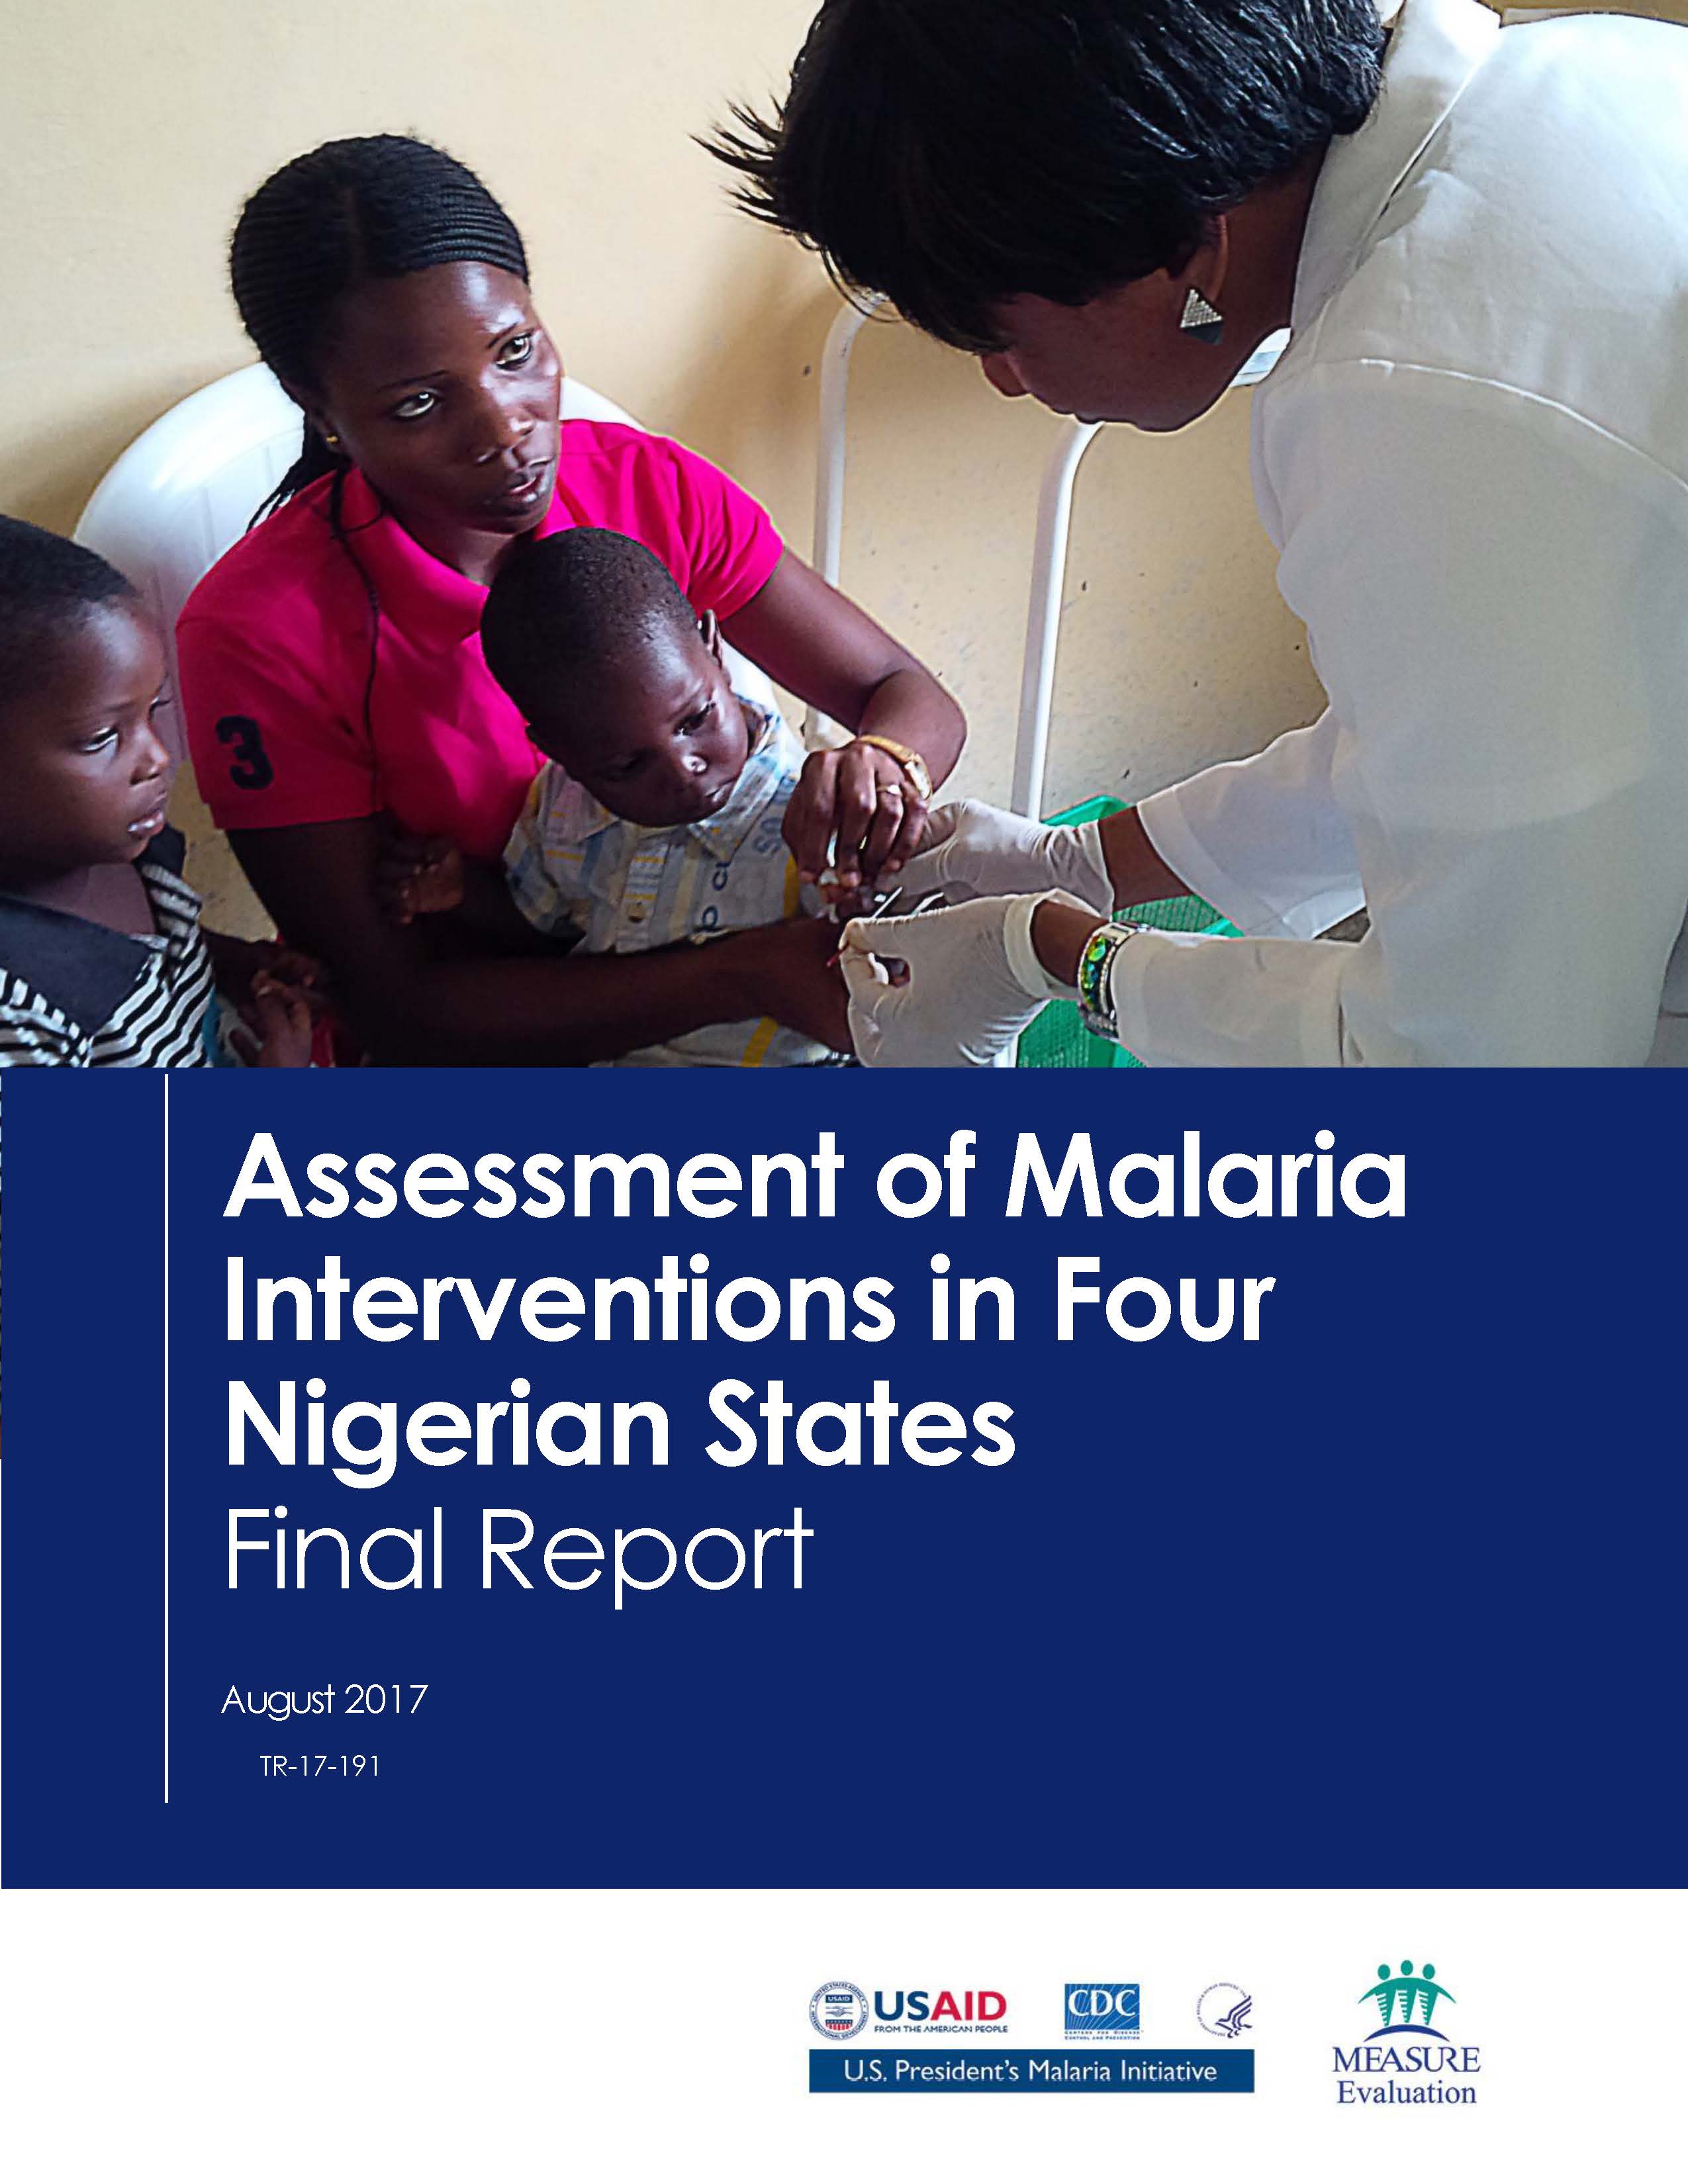 Assessment of Malaria Interventions in Four Nigerian States: Final Report